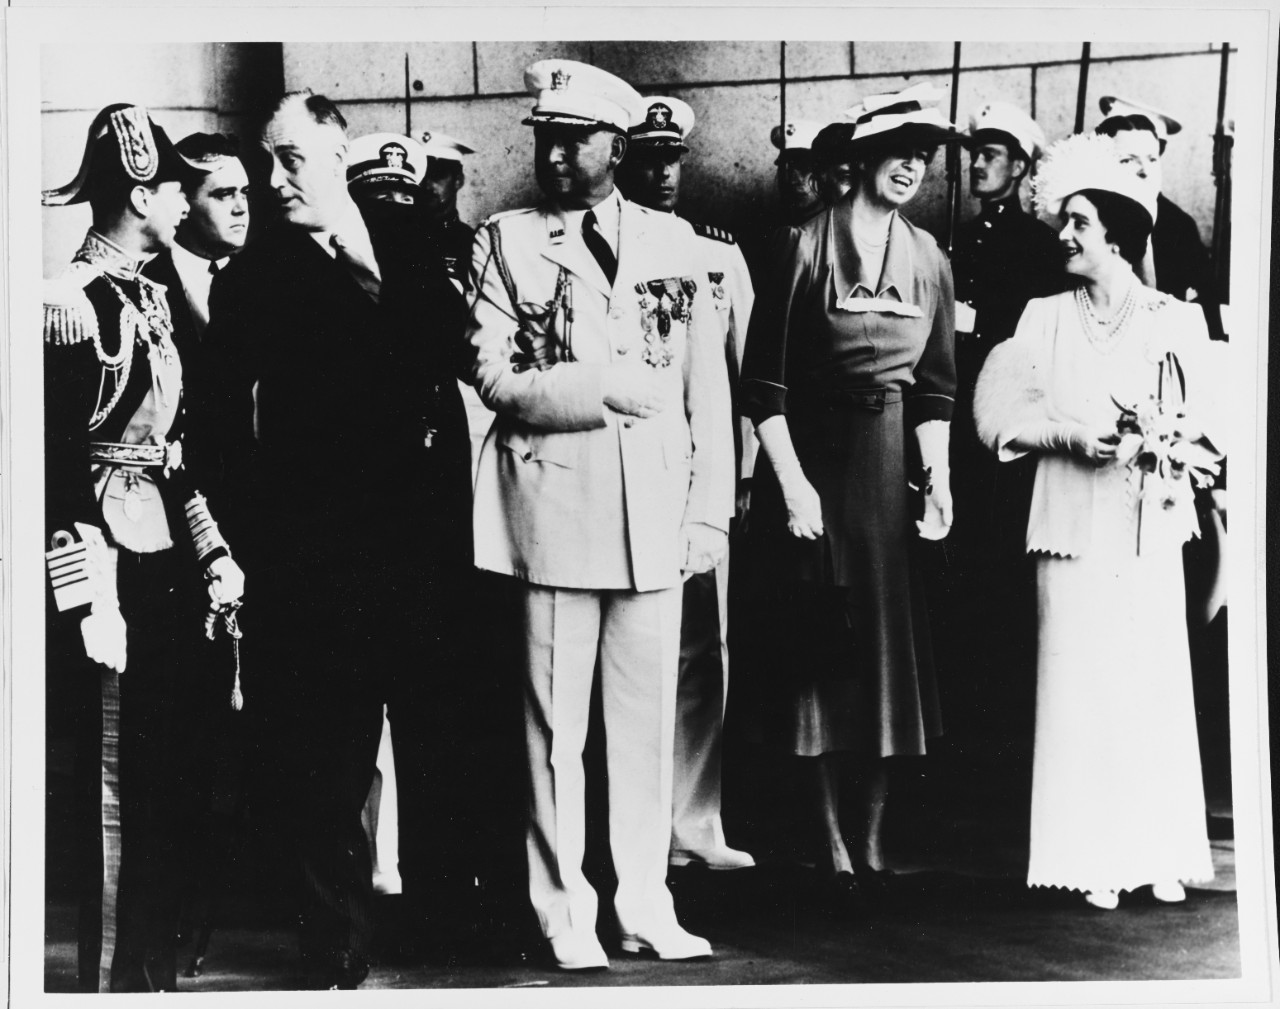 King and Queen of England at Union Station, Washington, DC., June 8, 1939